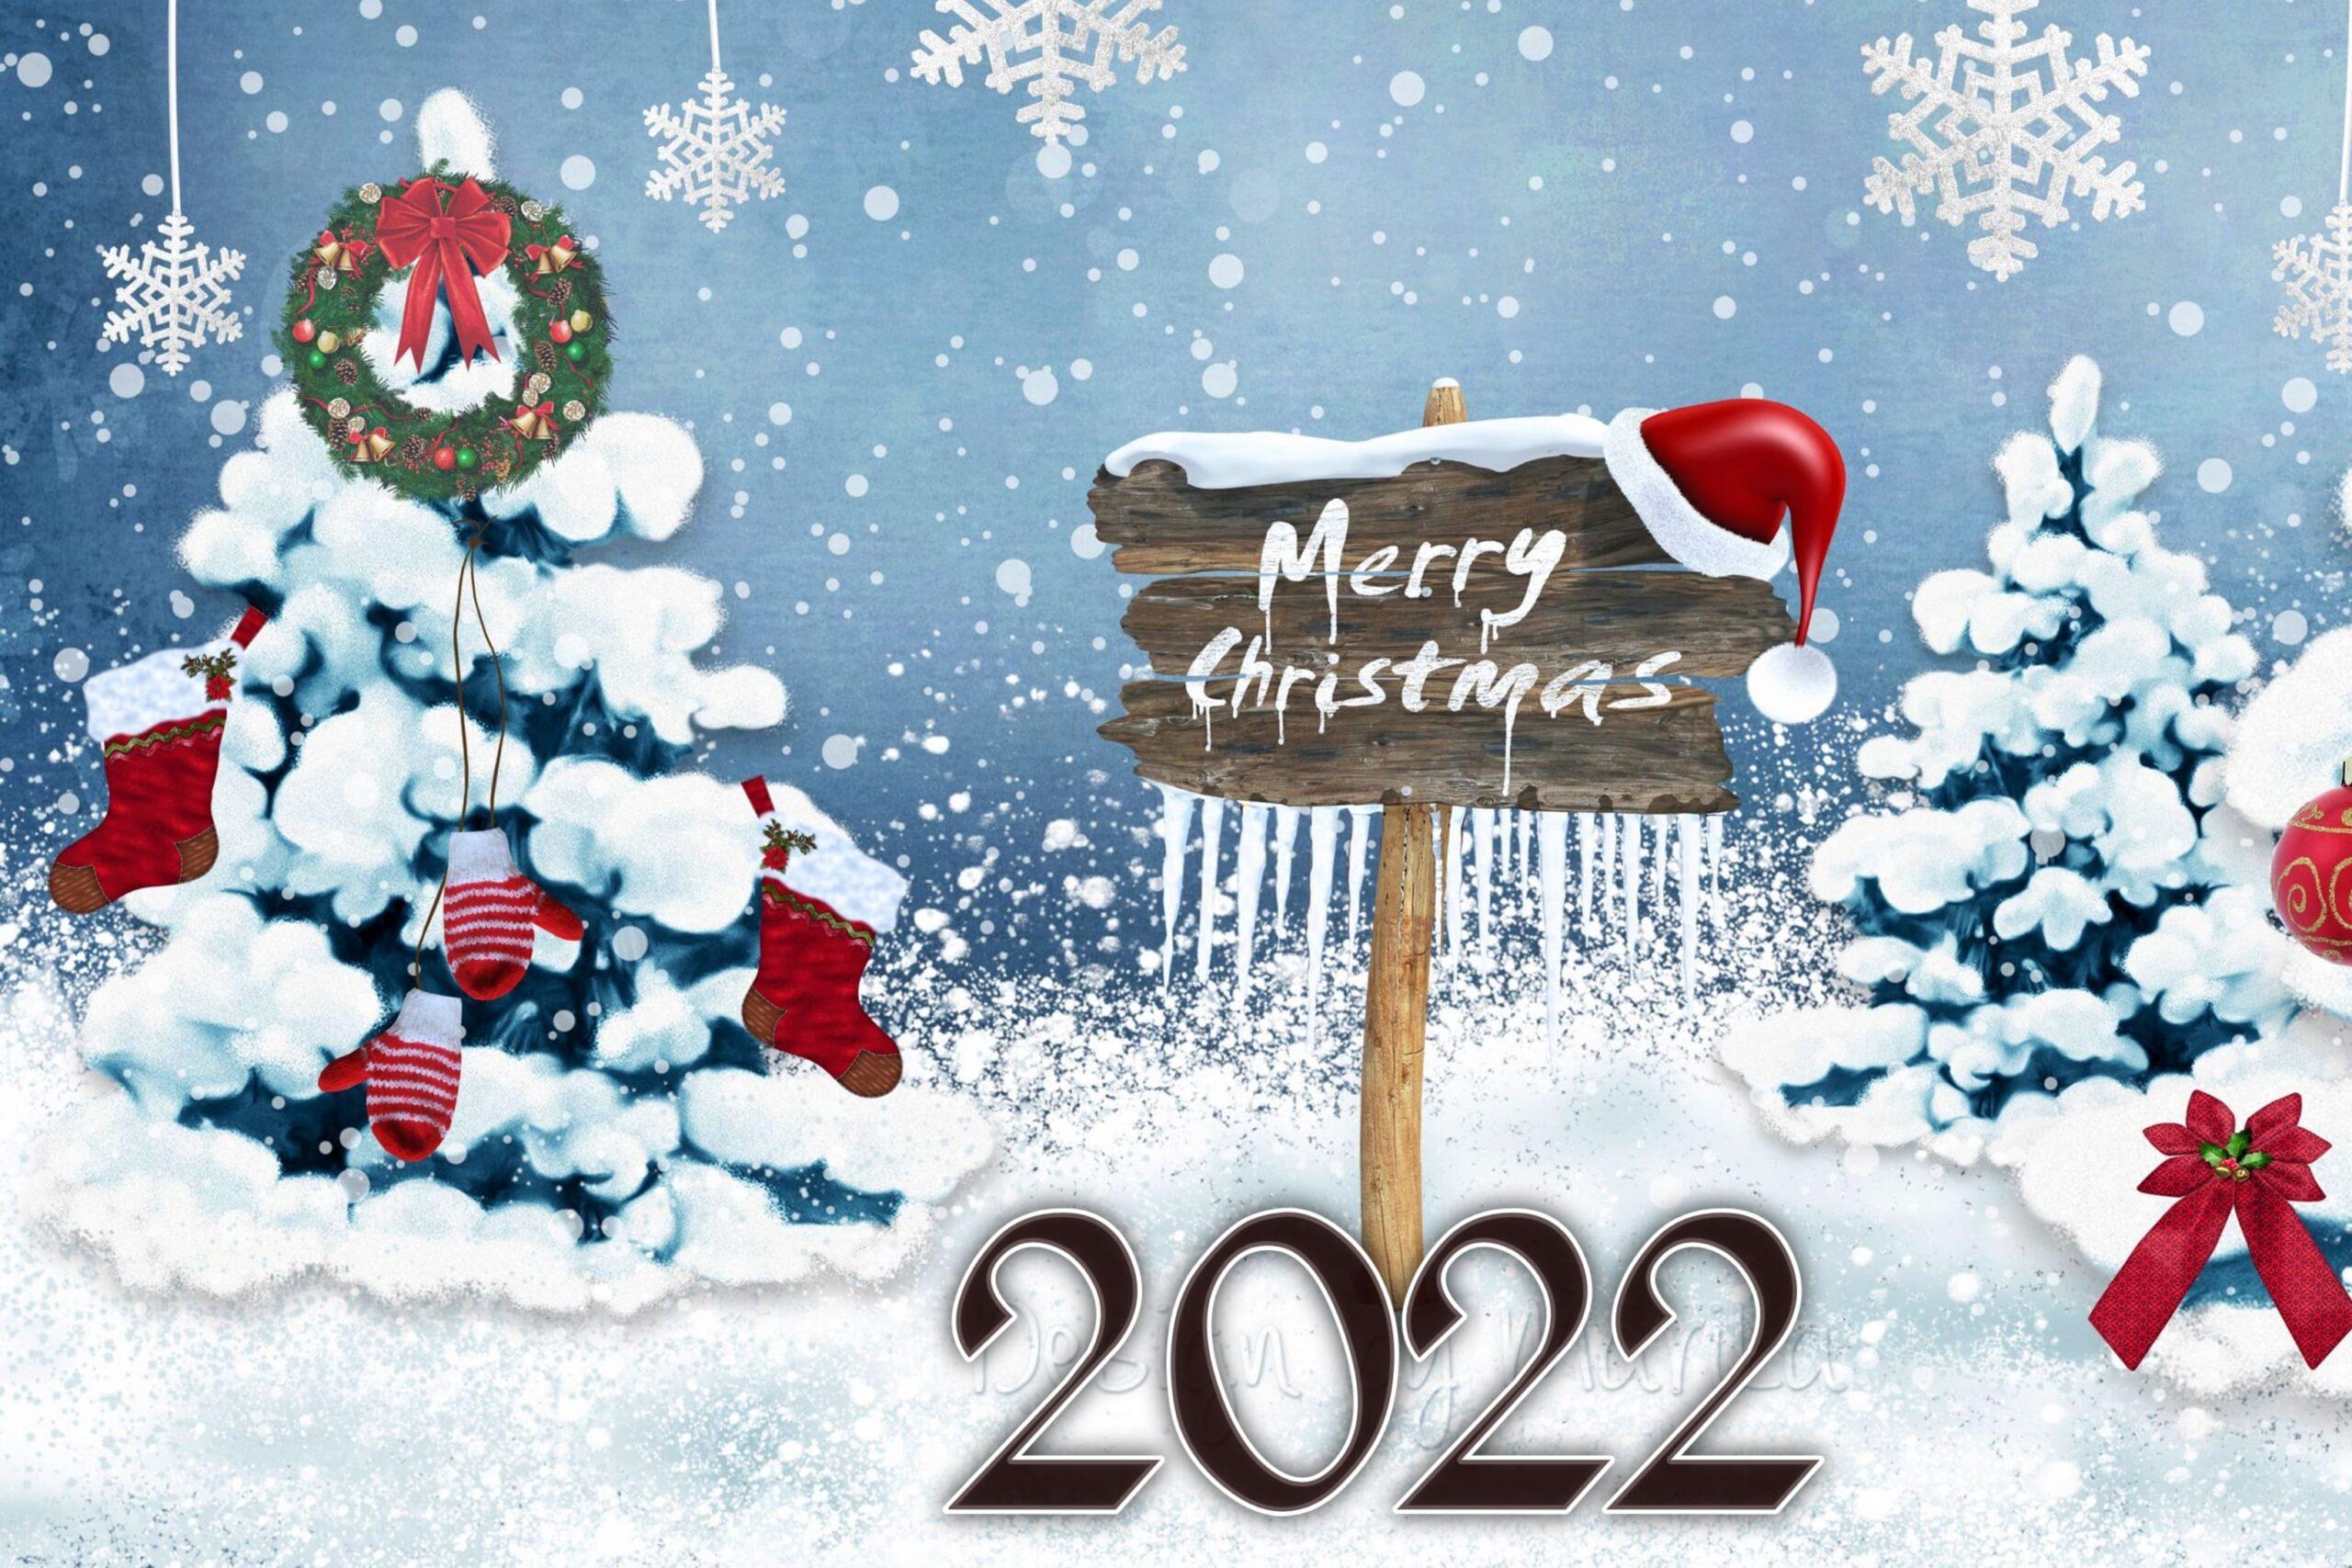 2022 christmas images